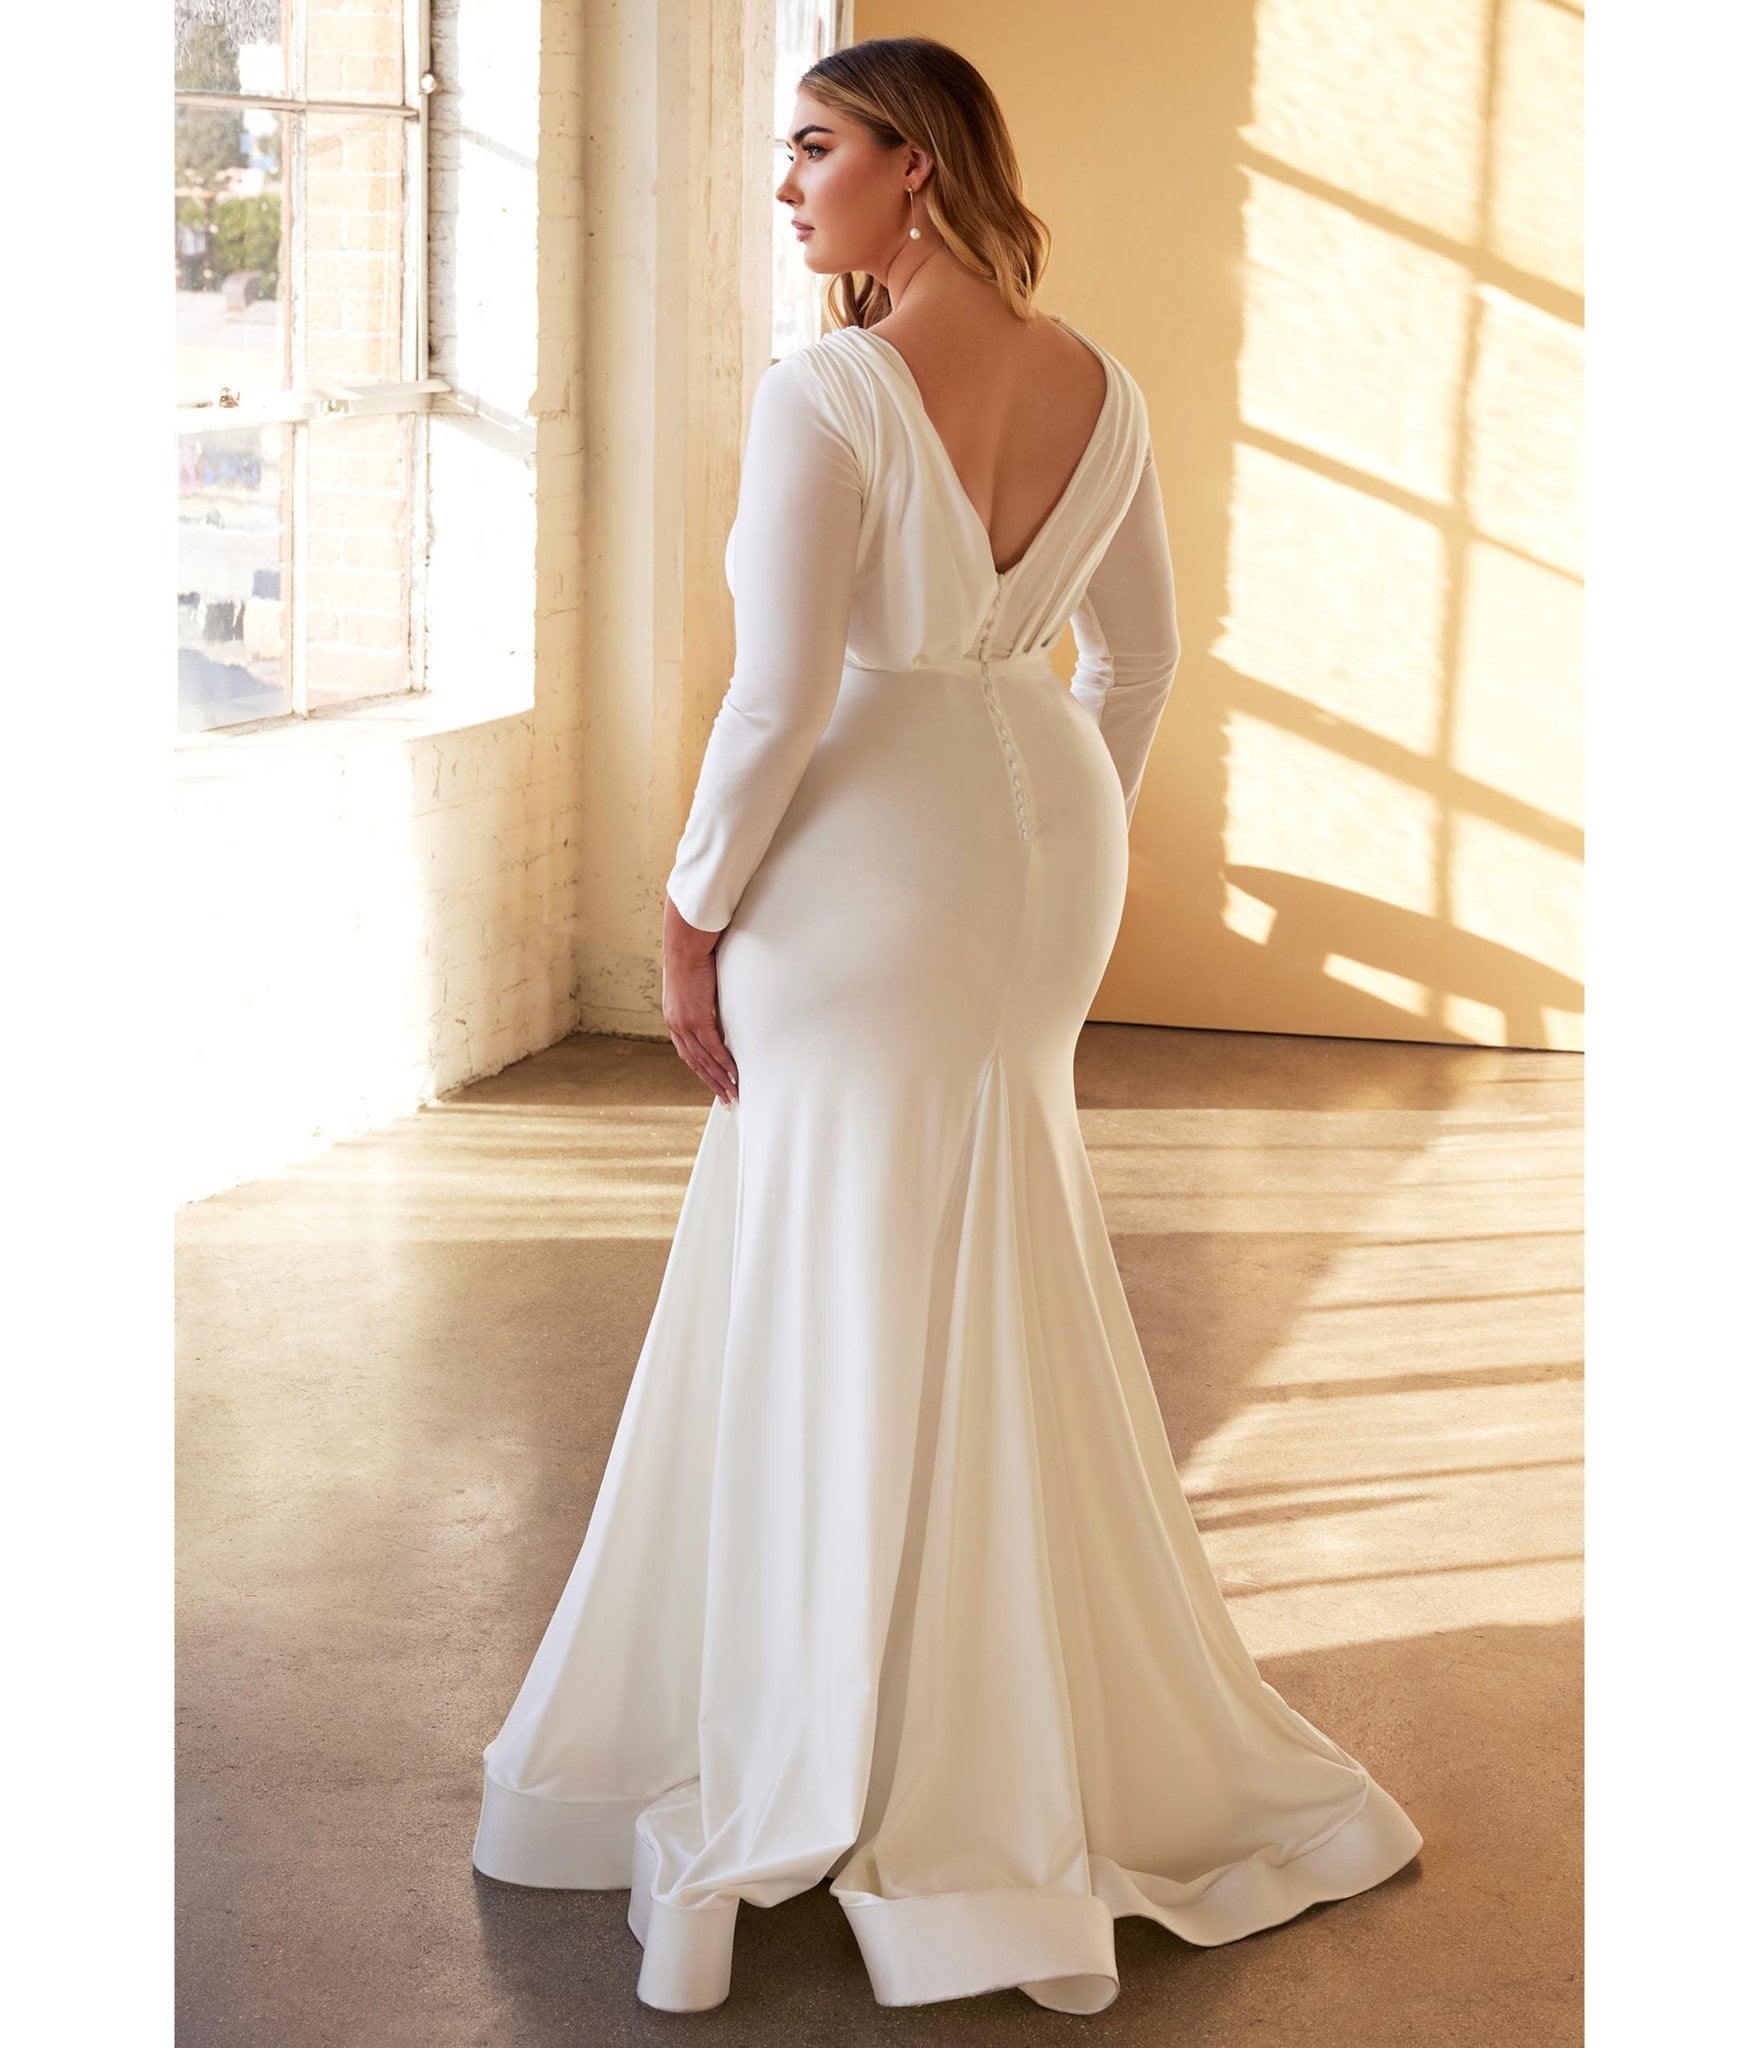 Elegant Plus Size Custom Mermaid Wedding Dress With Long Sleeves, Lace  Applique, And Floor Length Hemline Affordable Bridal Gown From Allanha,  $238.79 | DHgate.Com